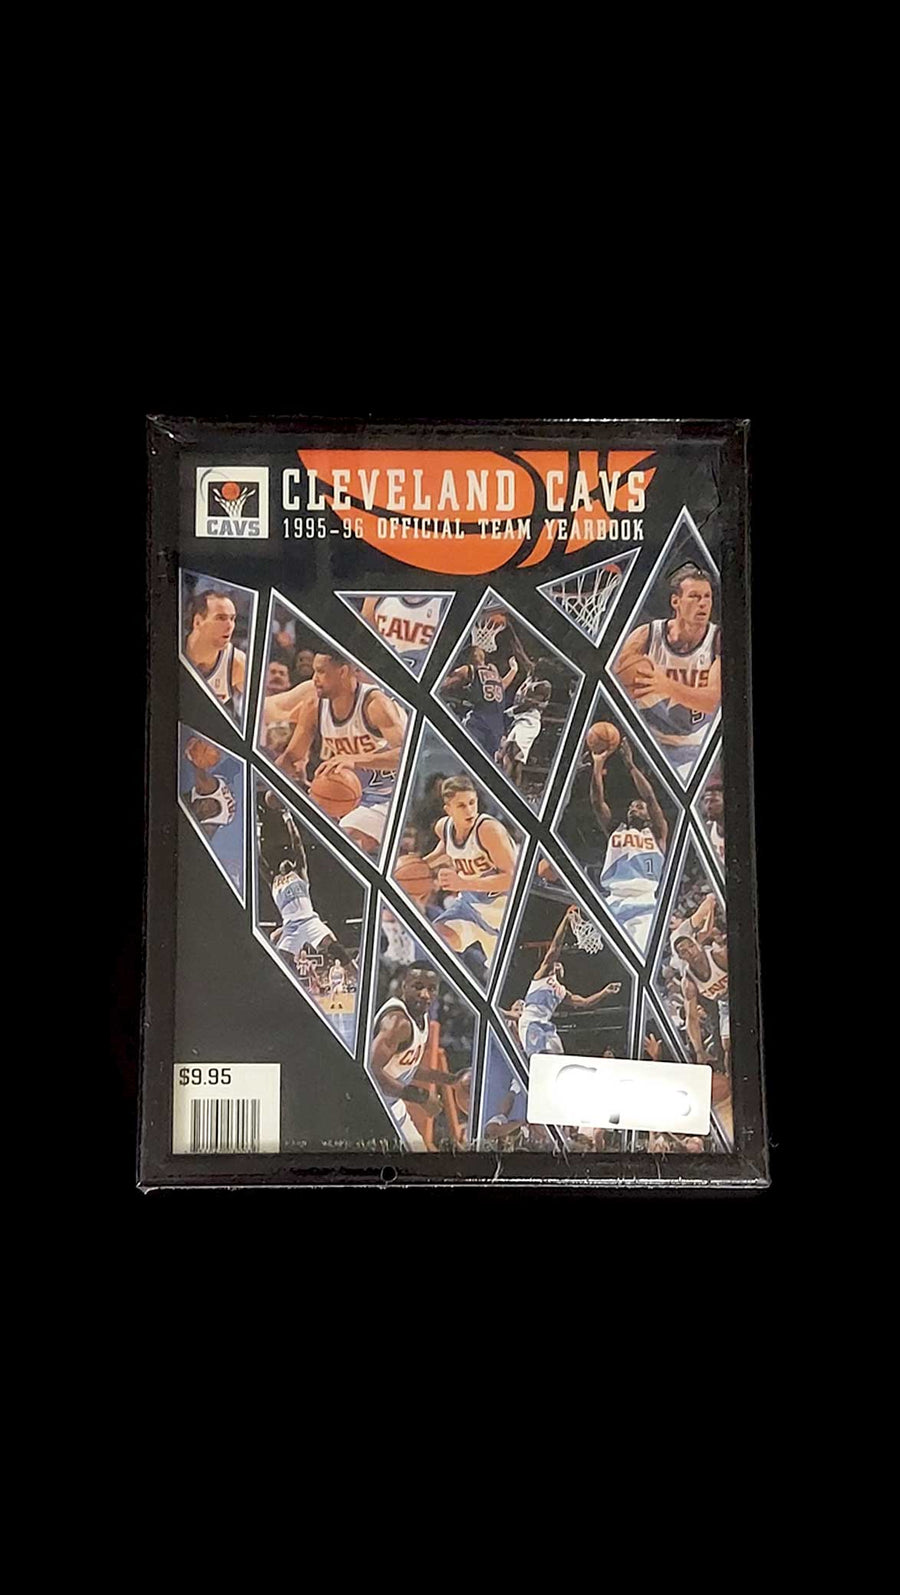 Cleveland-Cavs-1995-96-Official-Team-Yearbook